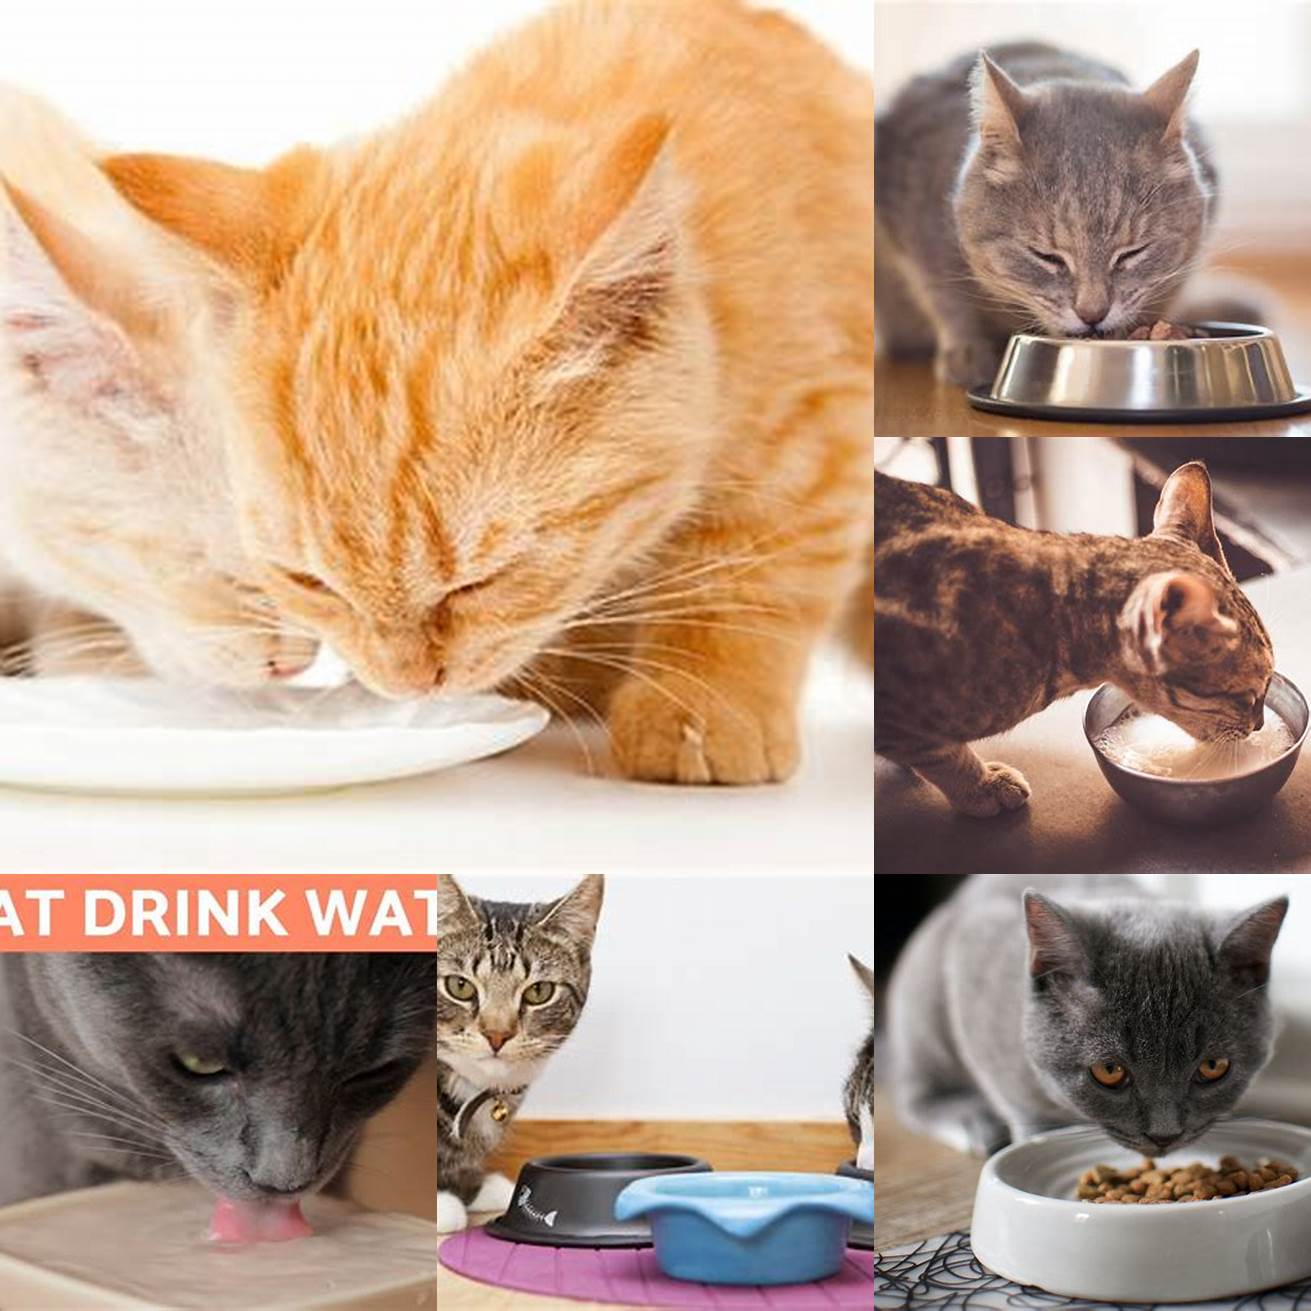 Monitor your cats eating and drinking habits